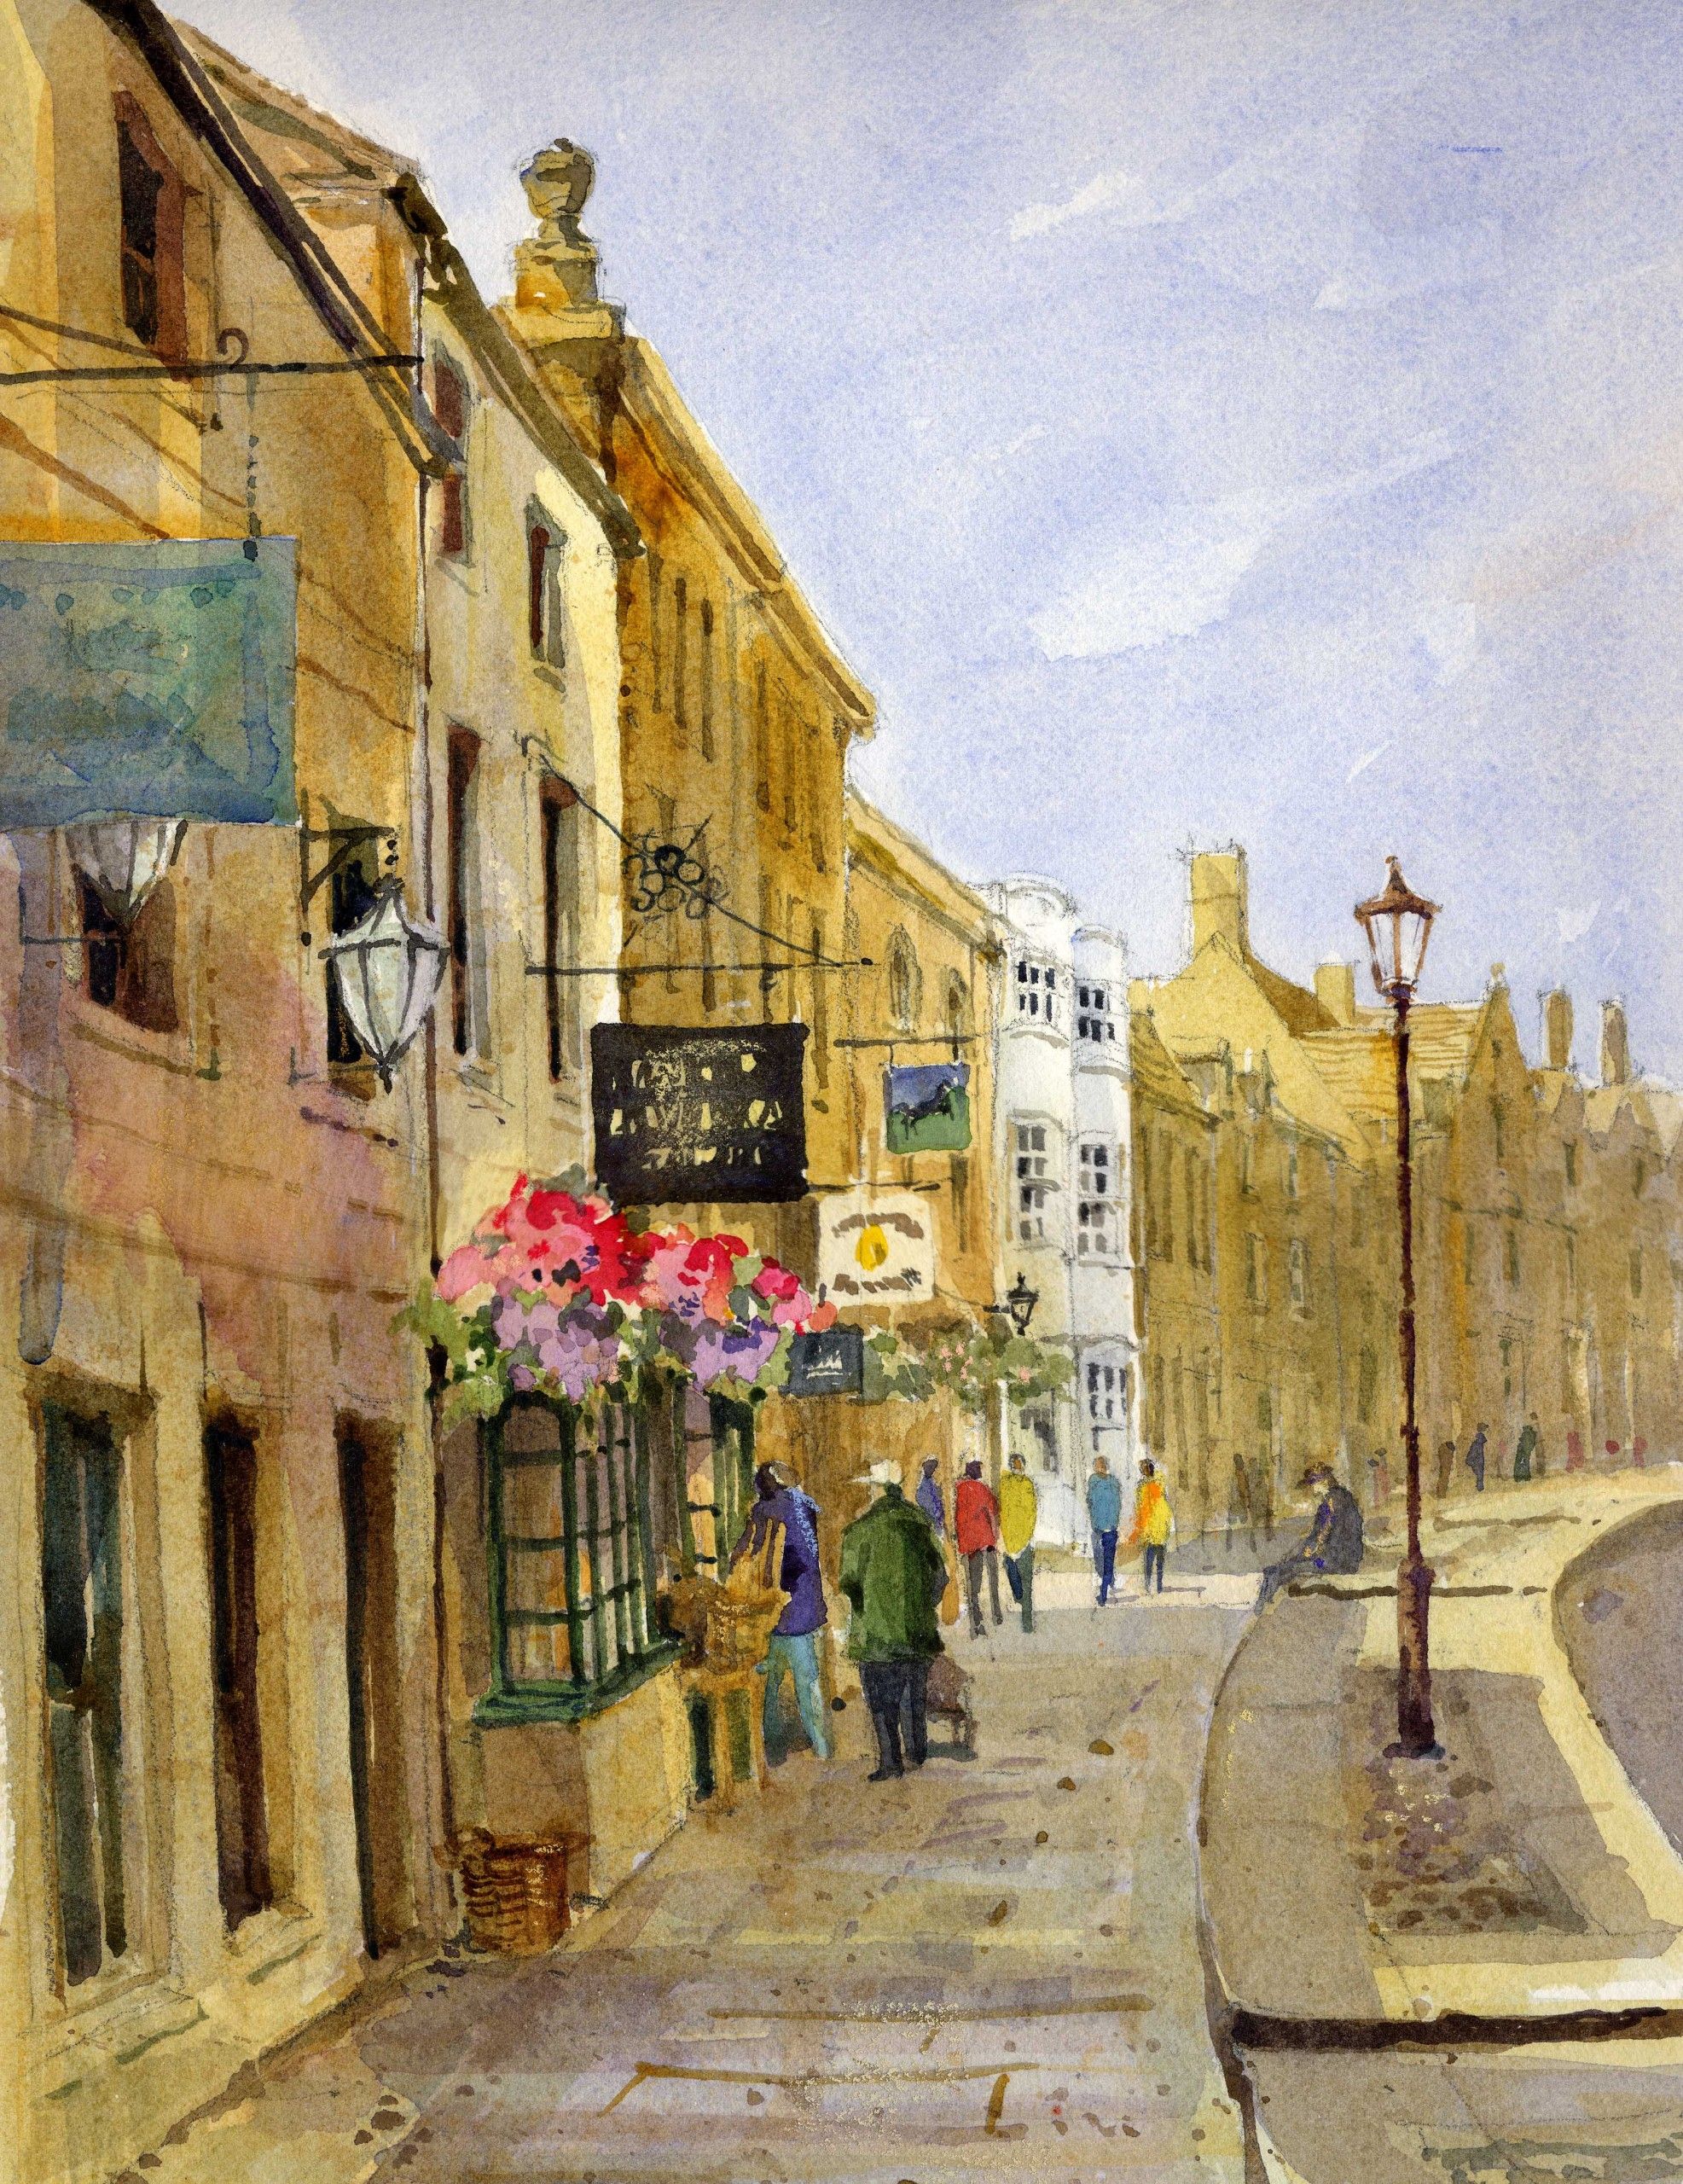 Chipping Campden by Elizabeth Chalmers